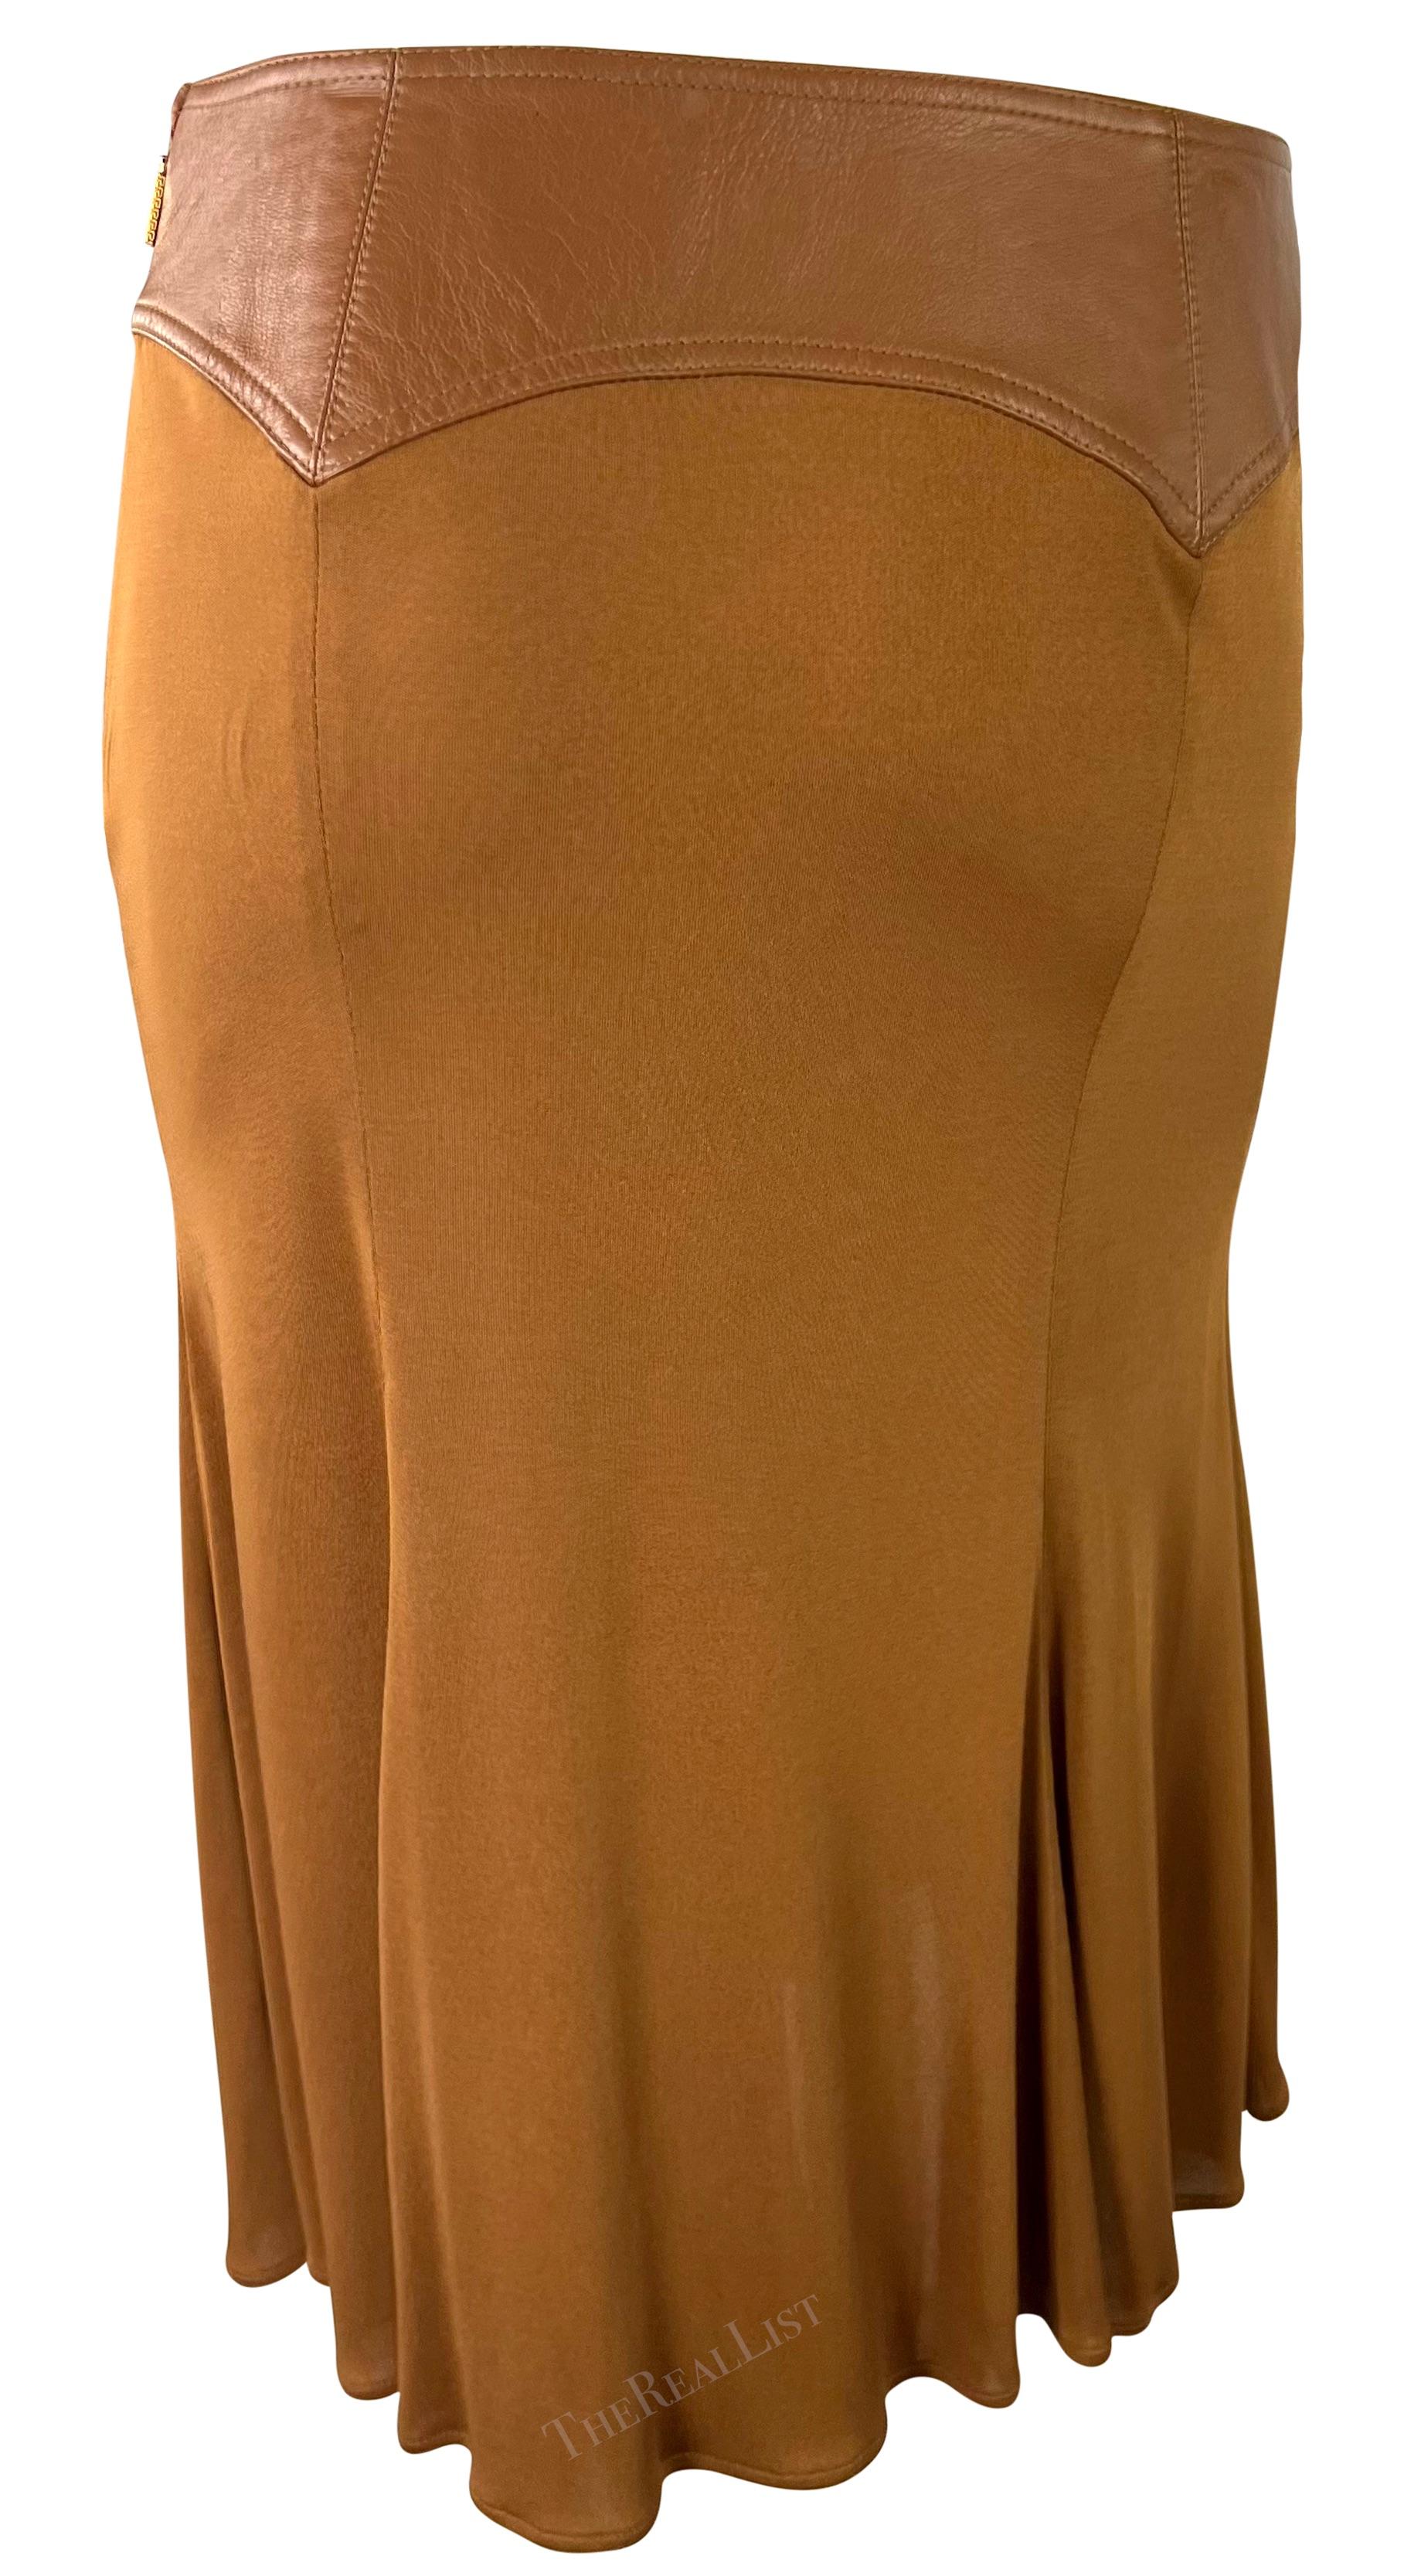 F/W 2001 Gianni Versace by Donatella Light Saddle Brown Leather Bodycon Skirt For Sale 2